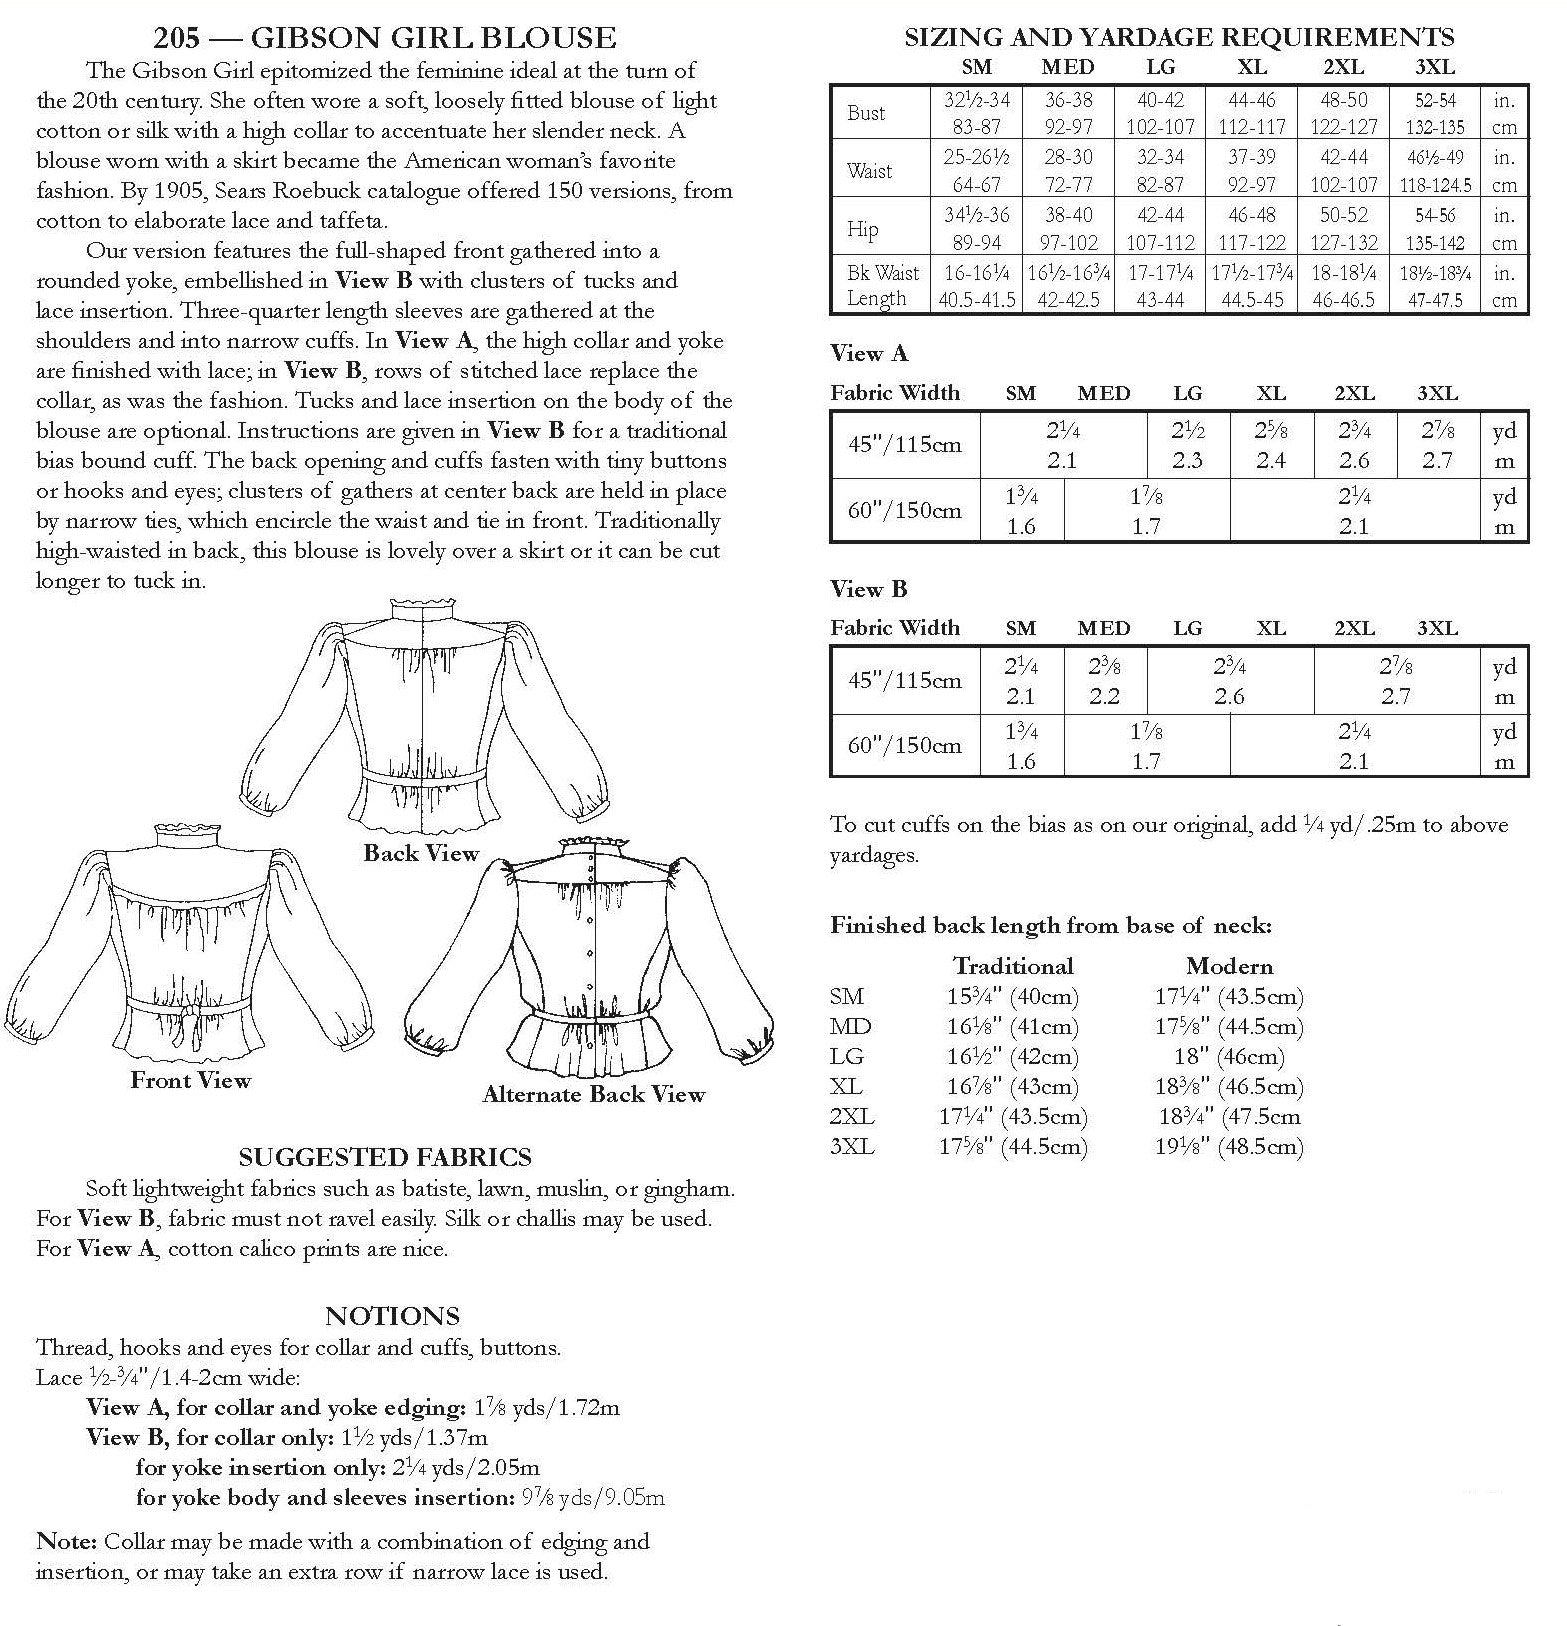 Photo of back of pattern cover. Cover shows description of pattern, views, fabric suggestions, and size and yardage charts.